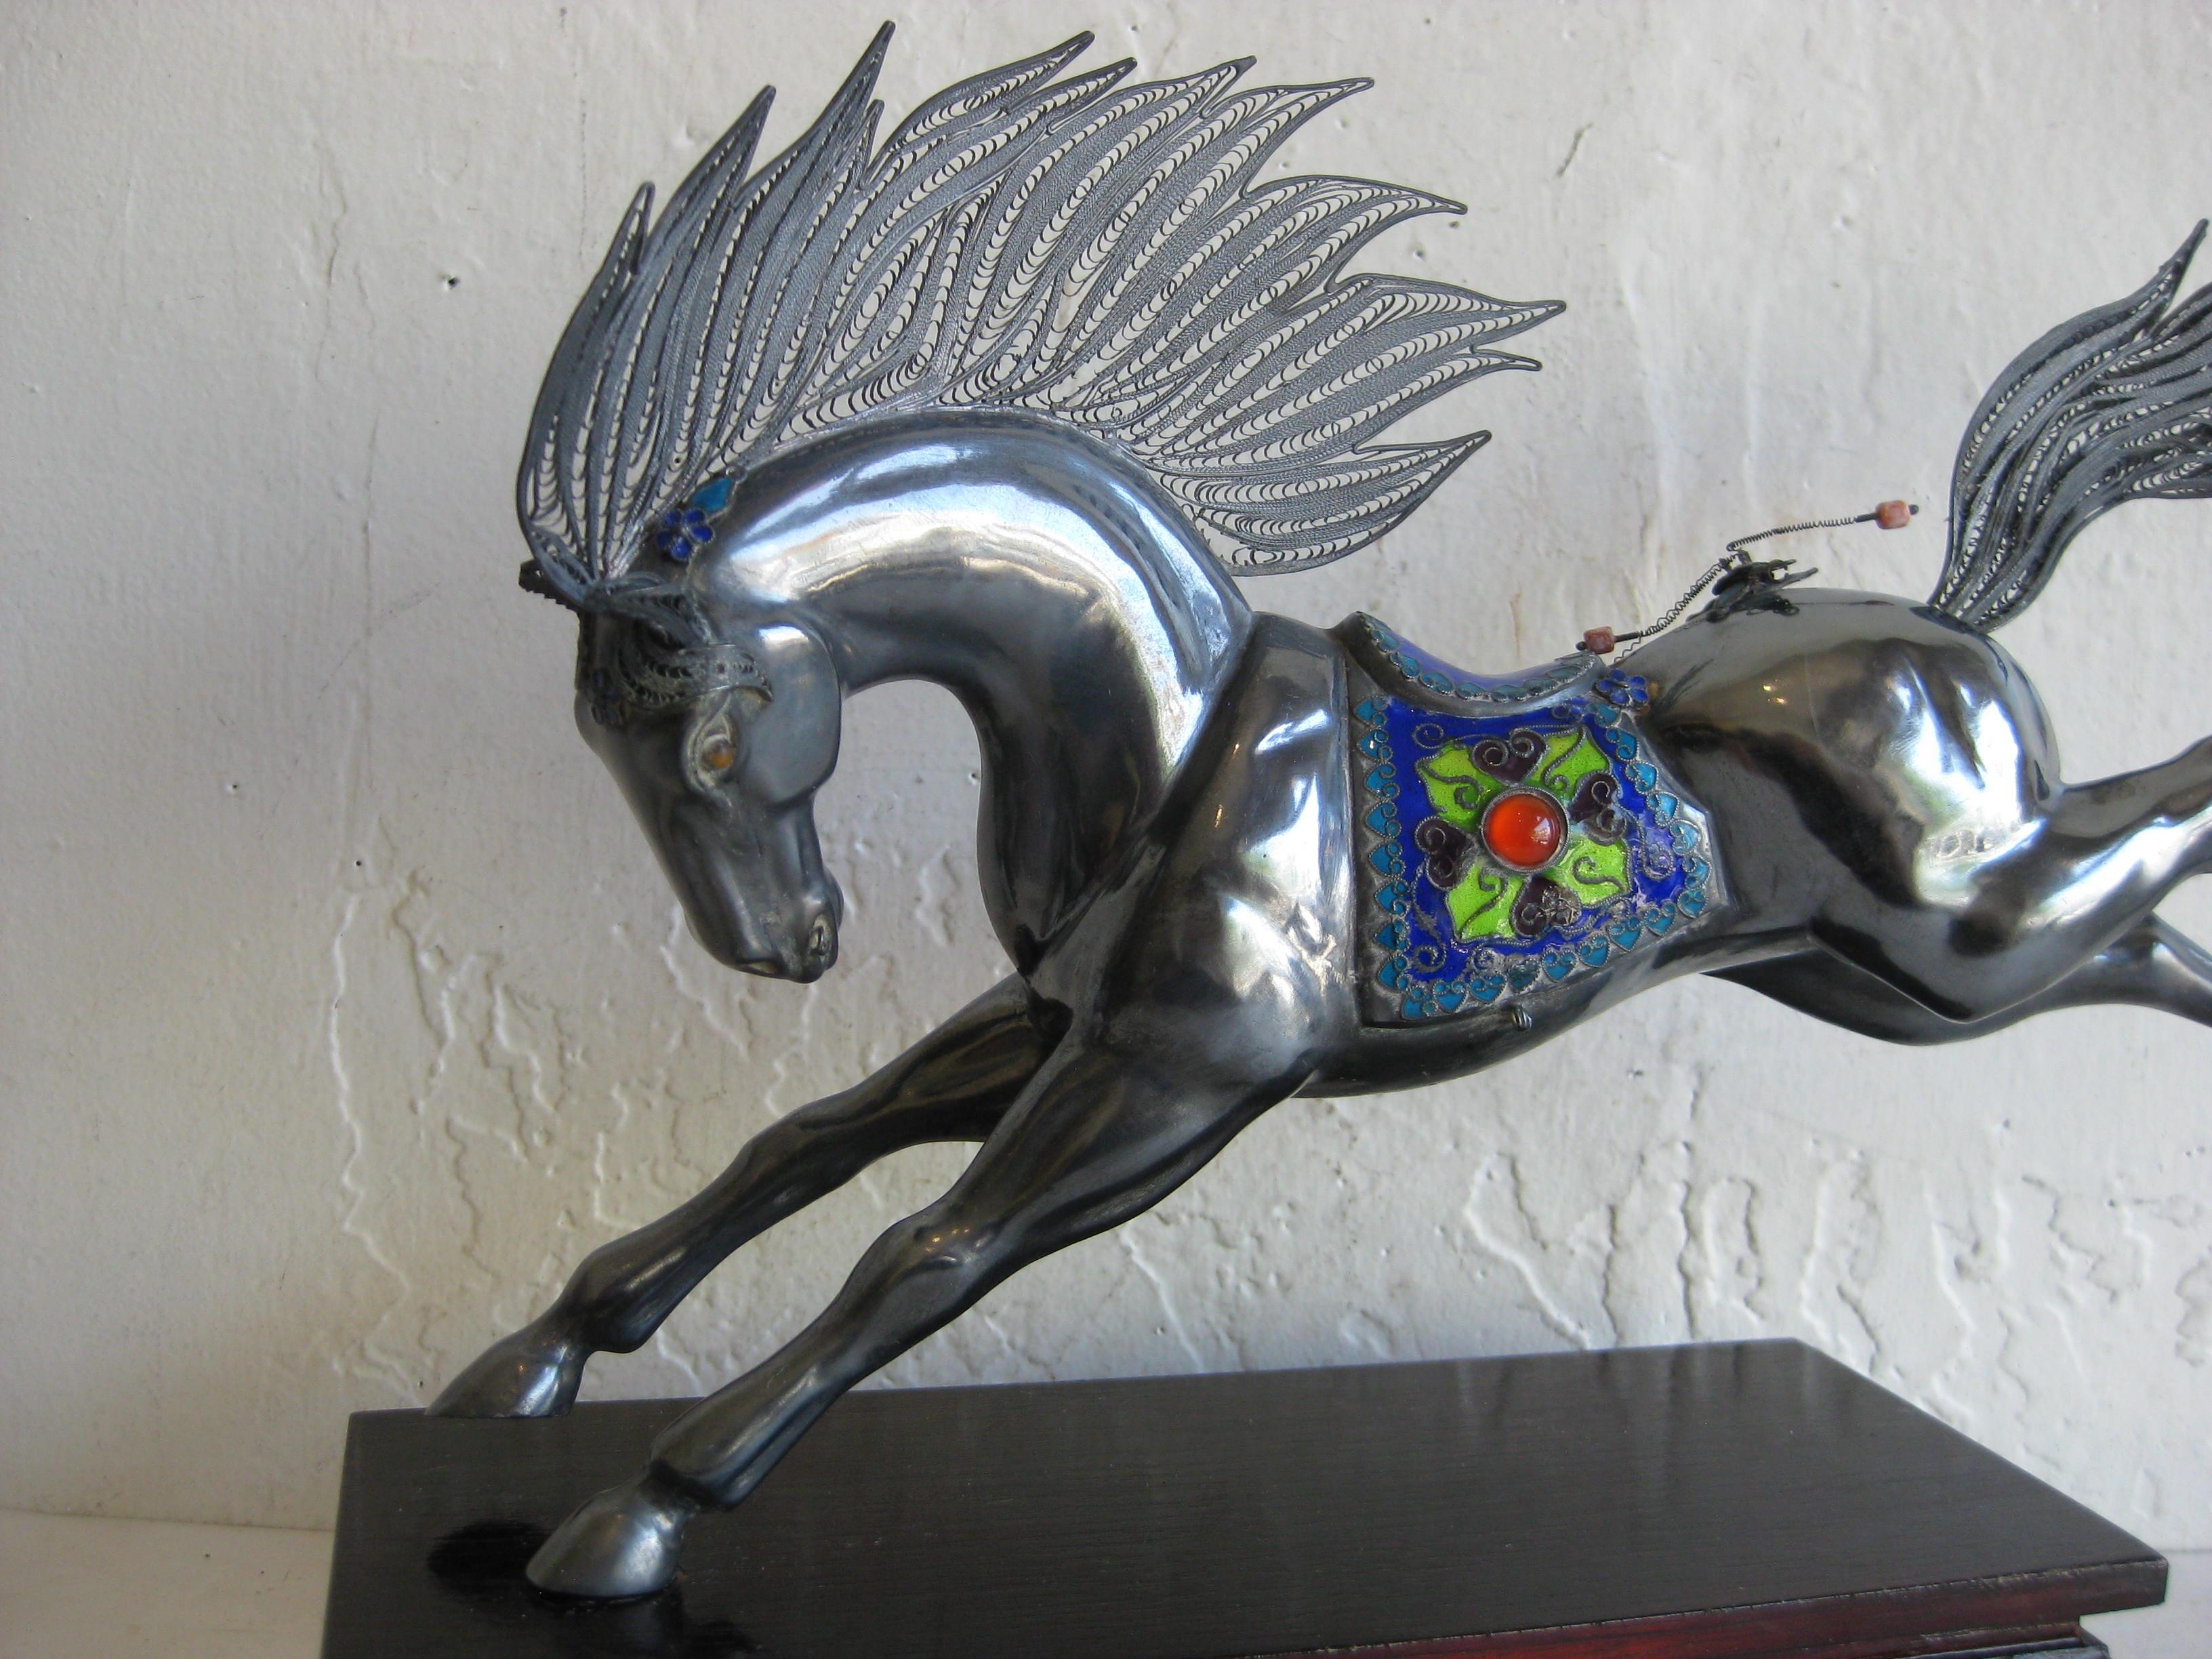 Fine antique Chinese sterling silver and enamel horse sculpture mounted on a lacquered wood stand. The horse is made of sterling silver and is made well. Has enamel decorations as seen in the photos. Also coral beads as decorations. Missing one